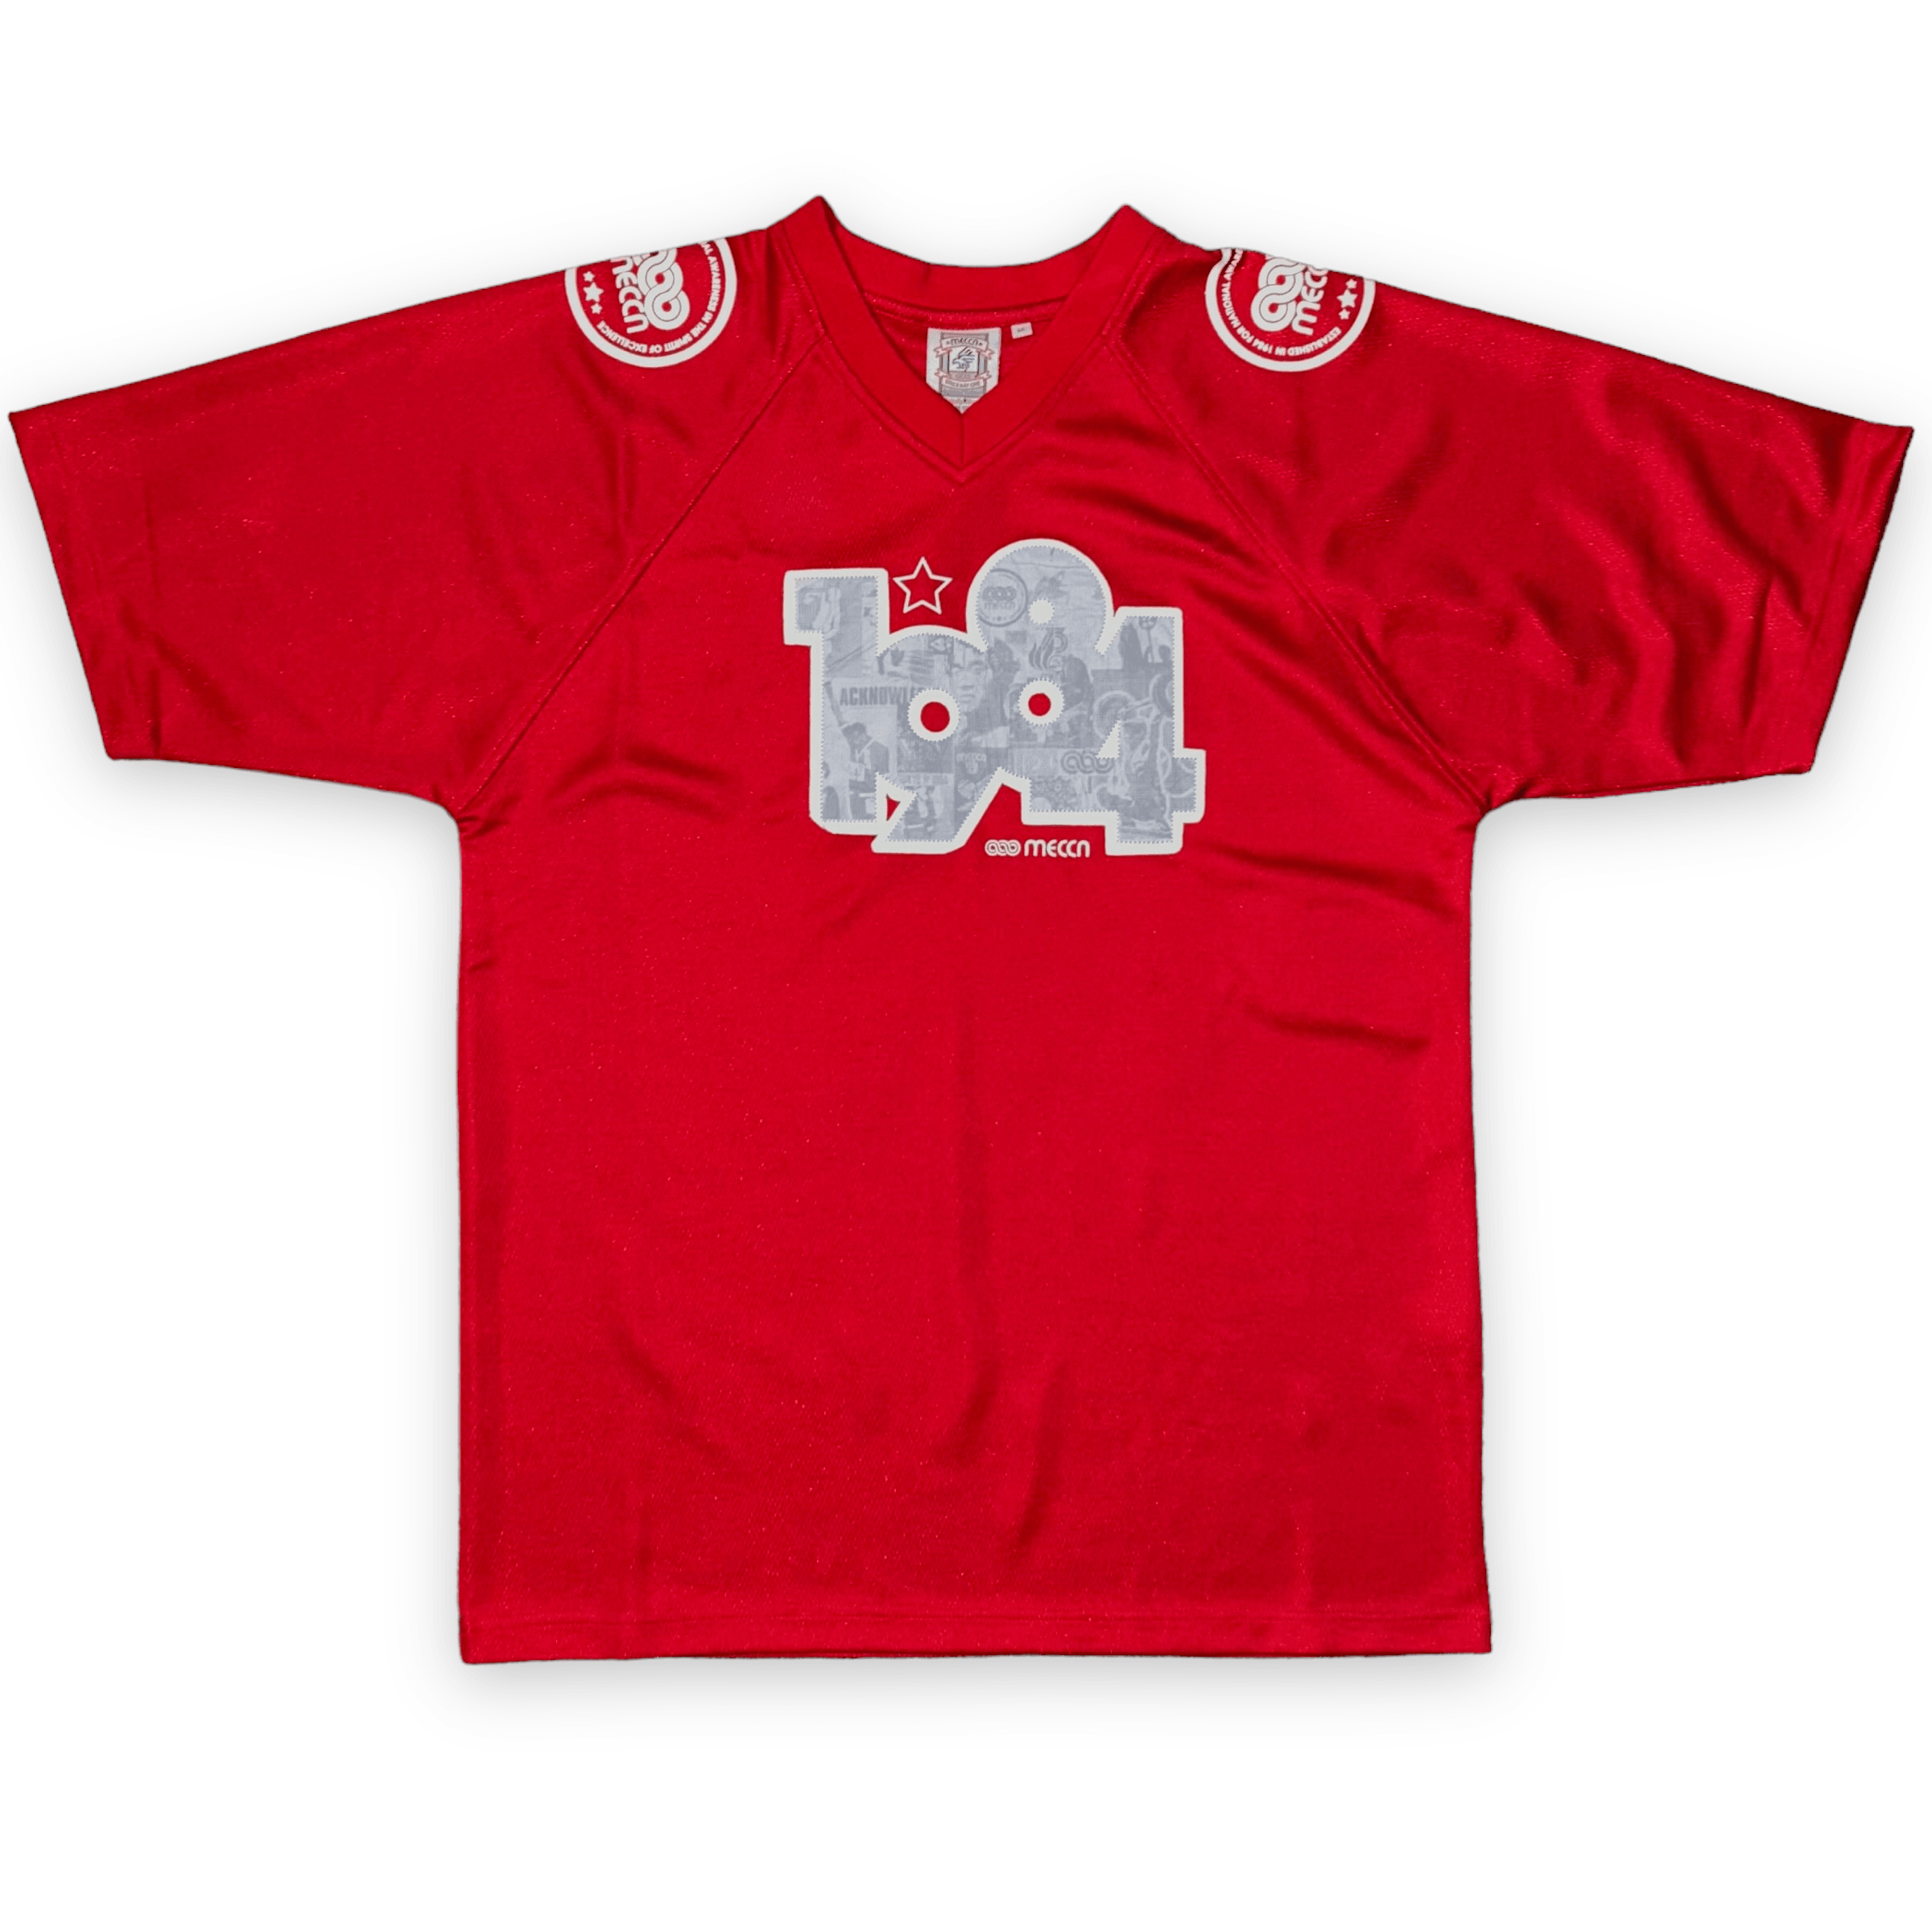 Jersey Mecca - oldstyleclothing